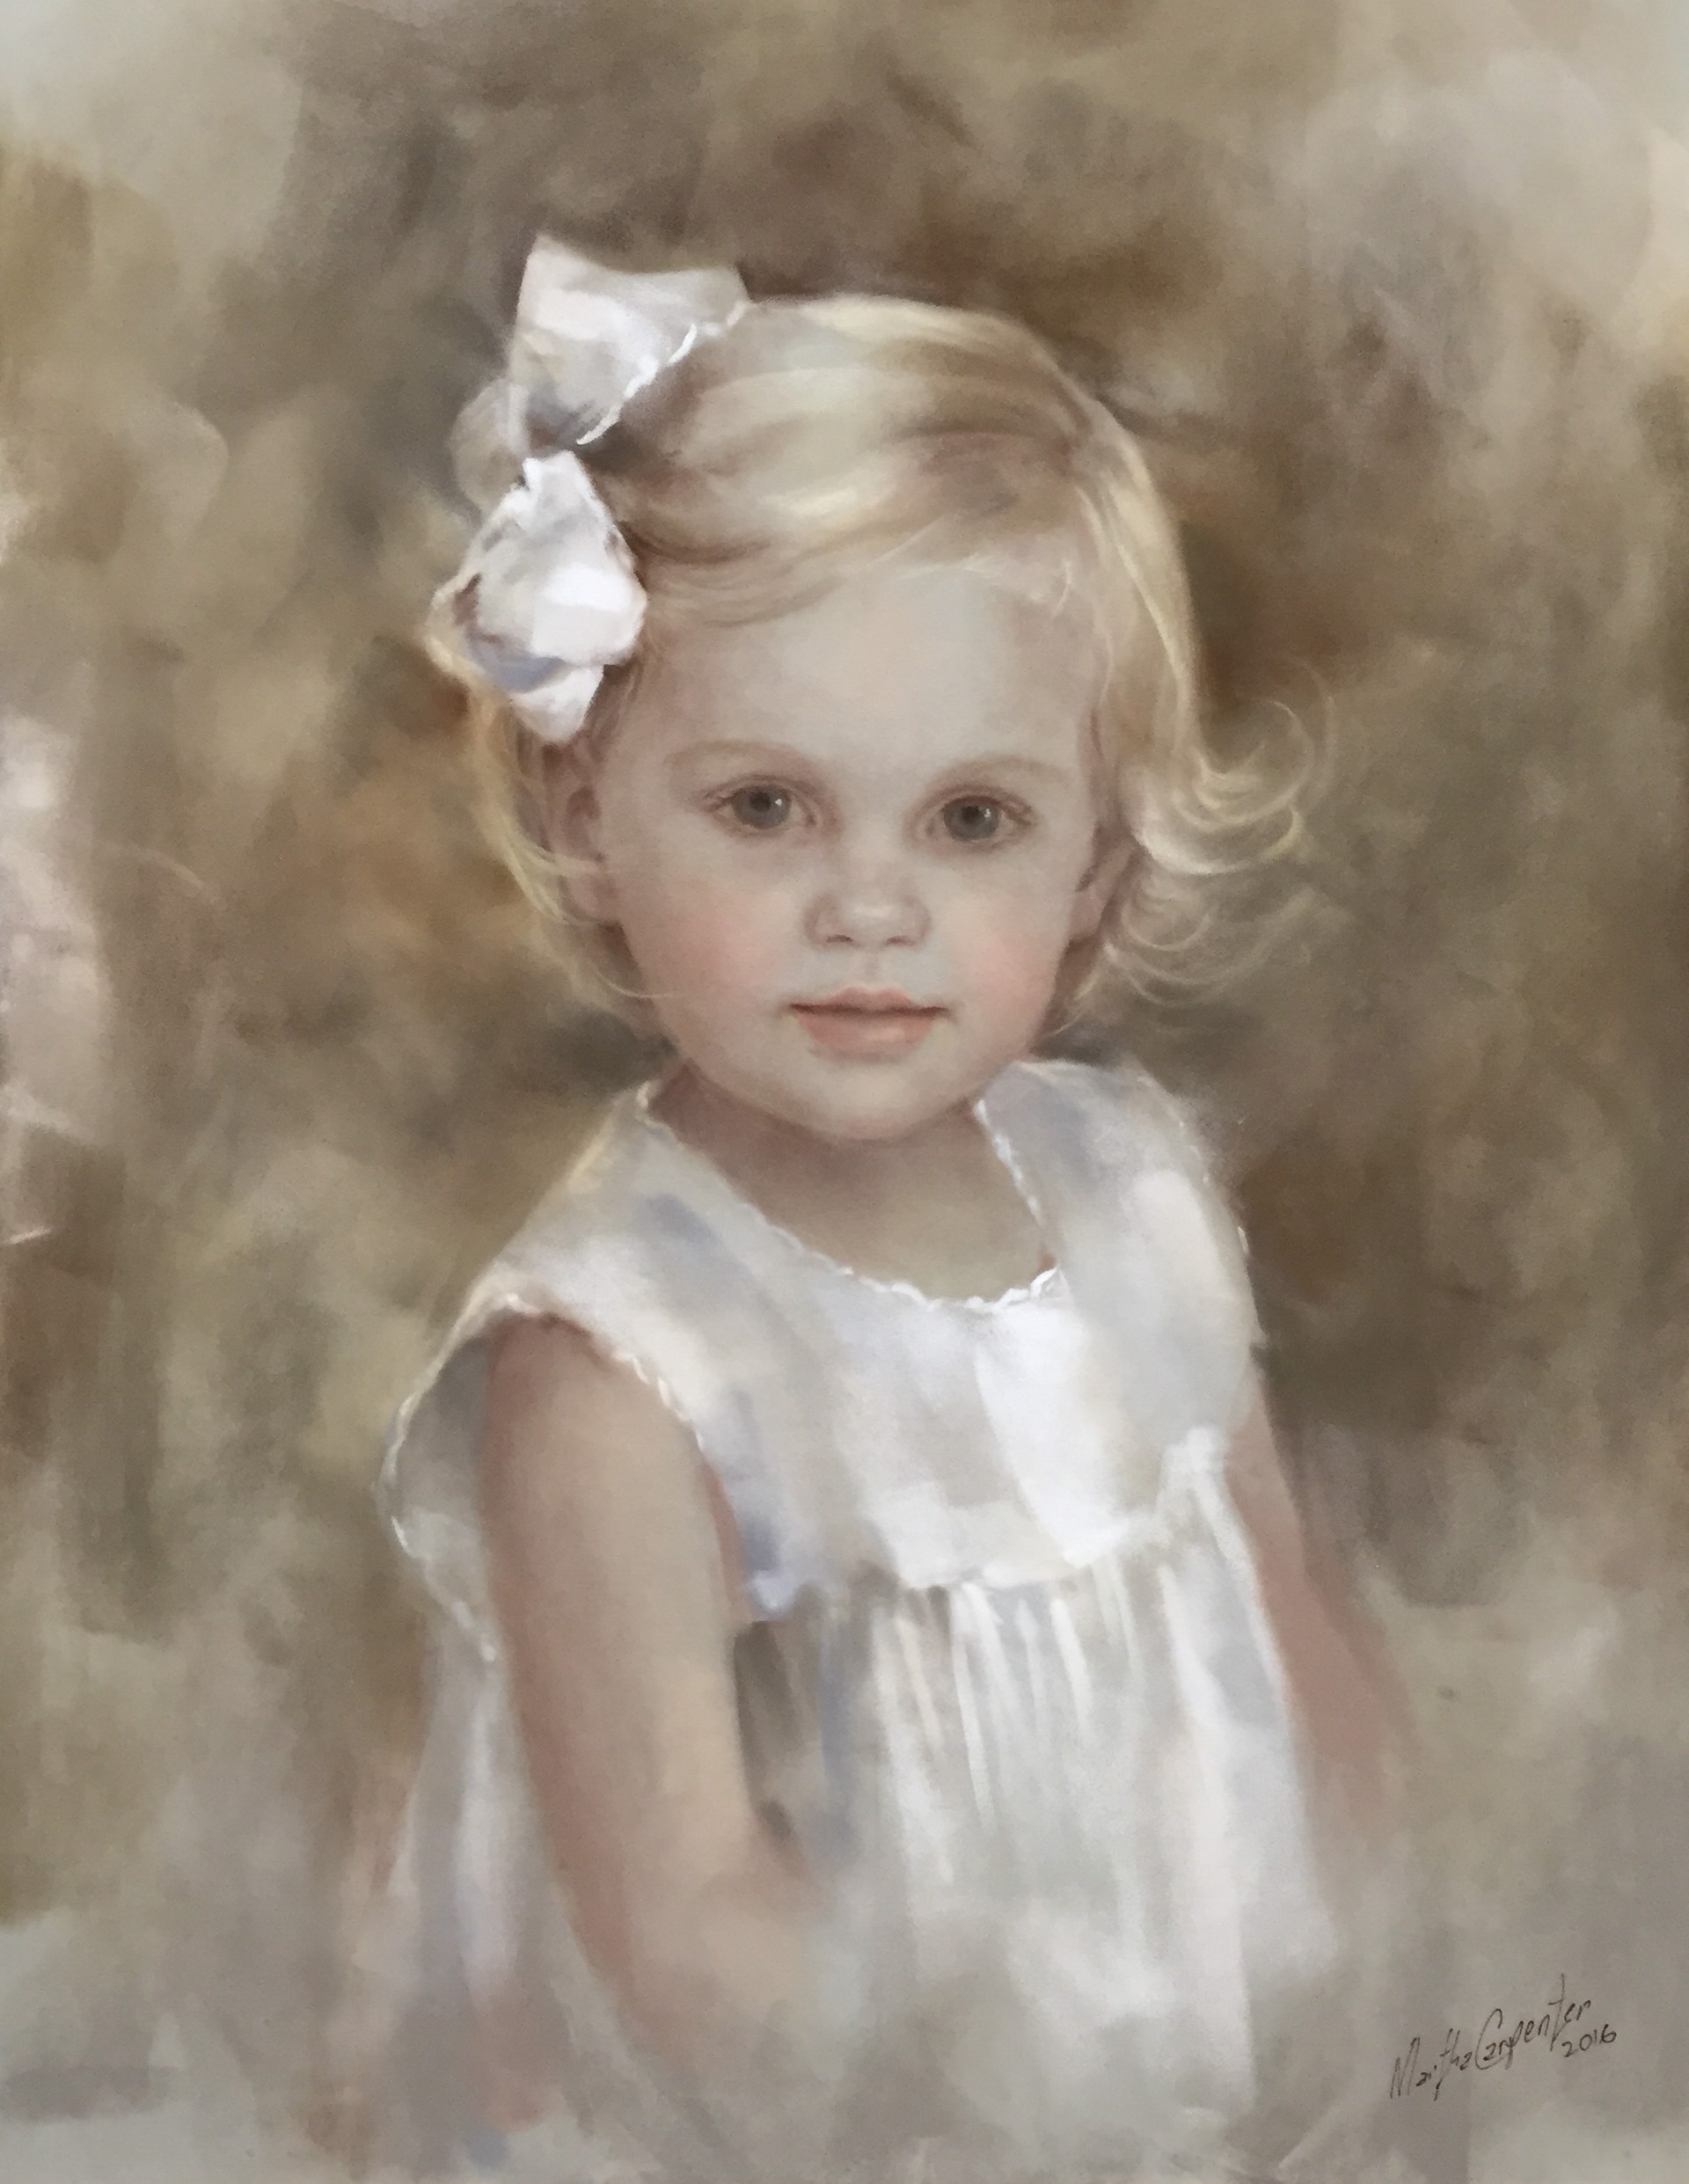 By Commission . Pastel in Sepia Tones by Martha Carpenter